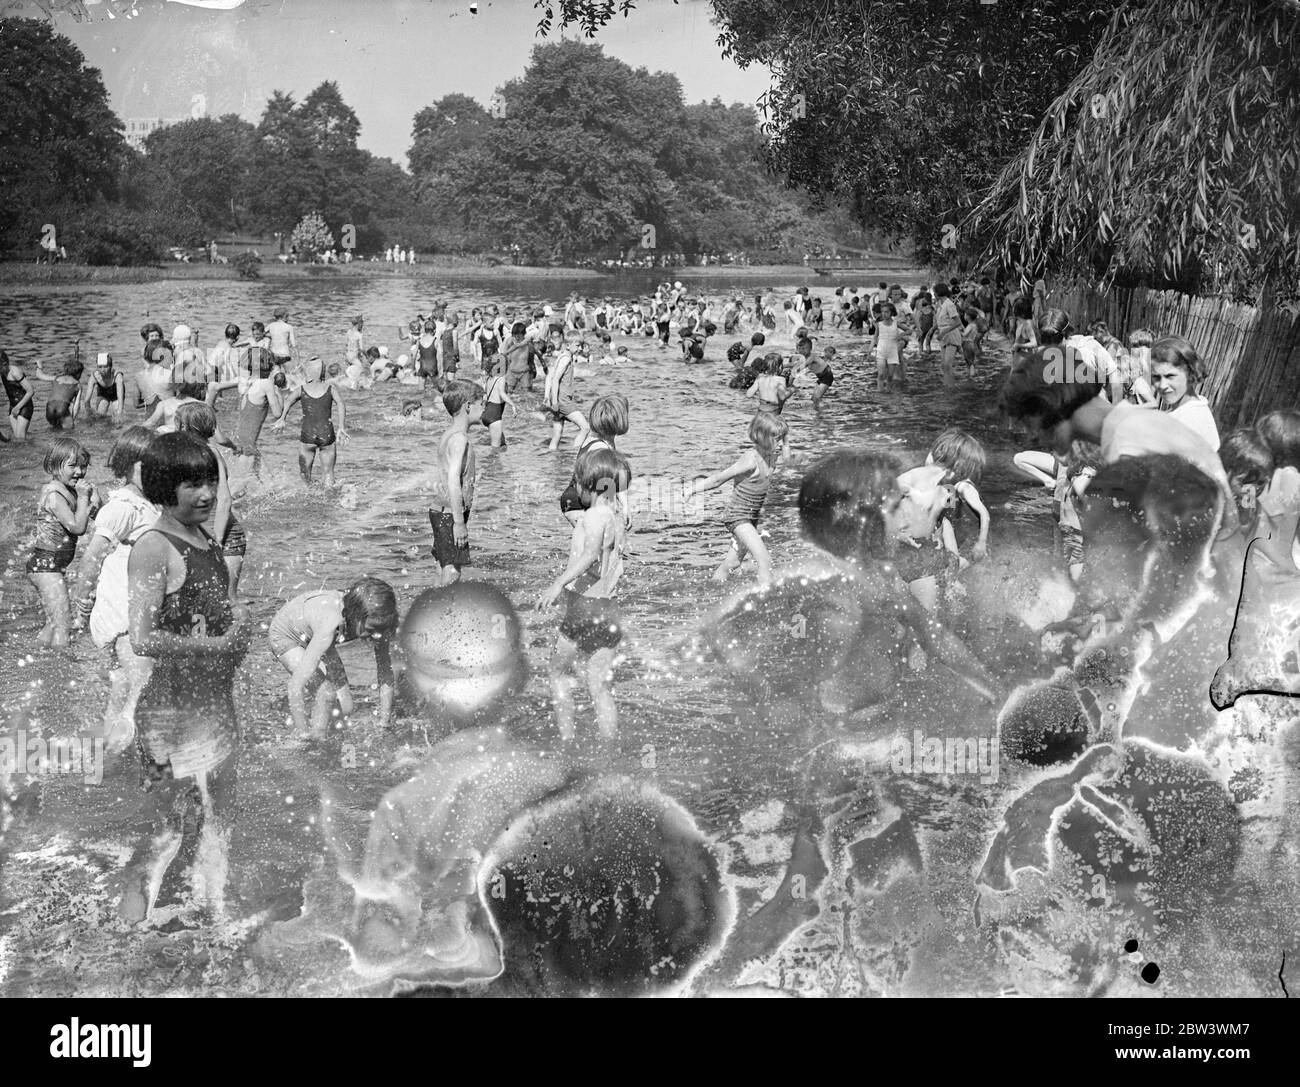 Young Londoners Go A - Paddling In The Heat Wave The heat wave has arrived in time to delight the hearts of thousands of London schoolchildren who are having their summer holidays . St James ' s Park with its swings and other apparatus and its cool paddling pond is attracting crowds of boys and girls . Photo shows : The pond crowded with young paddlers in St . James ' s Park 17 Aug 1936 Stock Photo